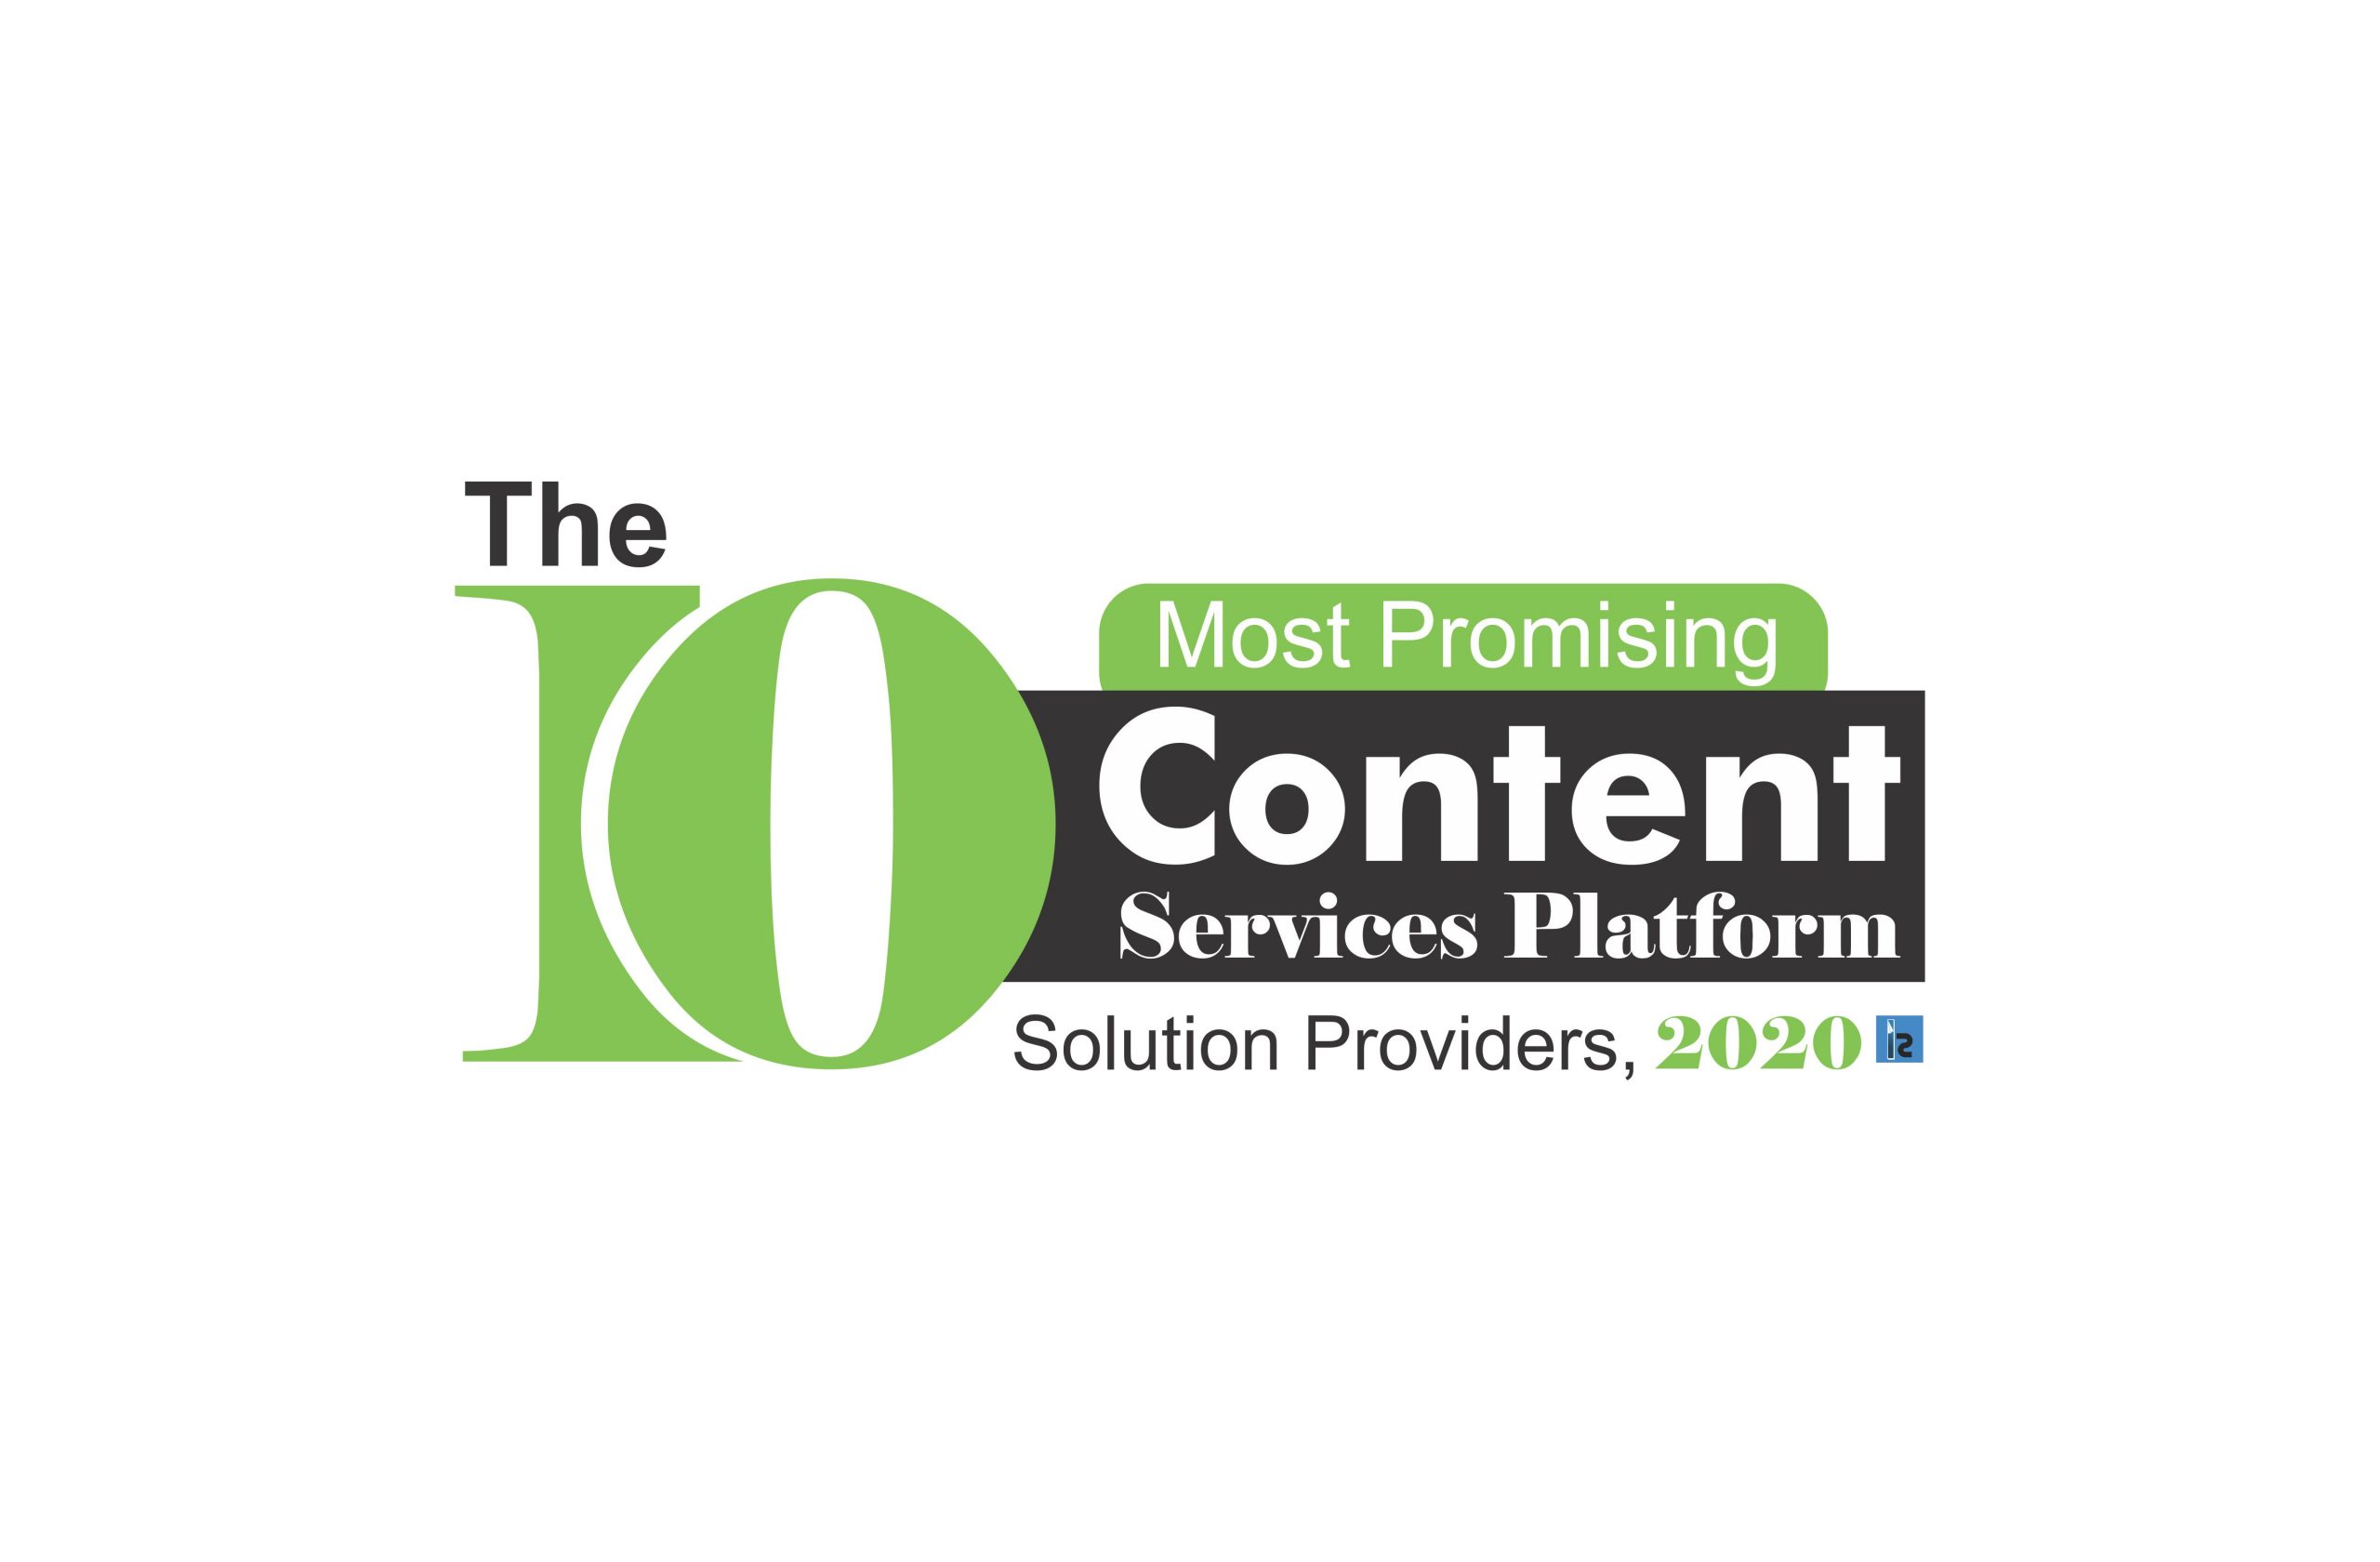 the-most-promising-content-services-platform-solution-providers-2020-insight-success-image